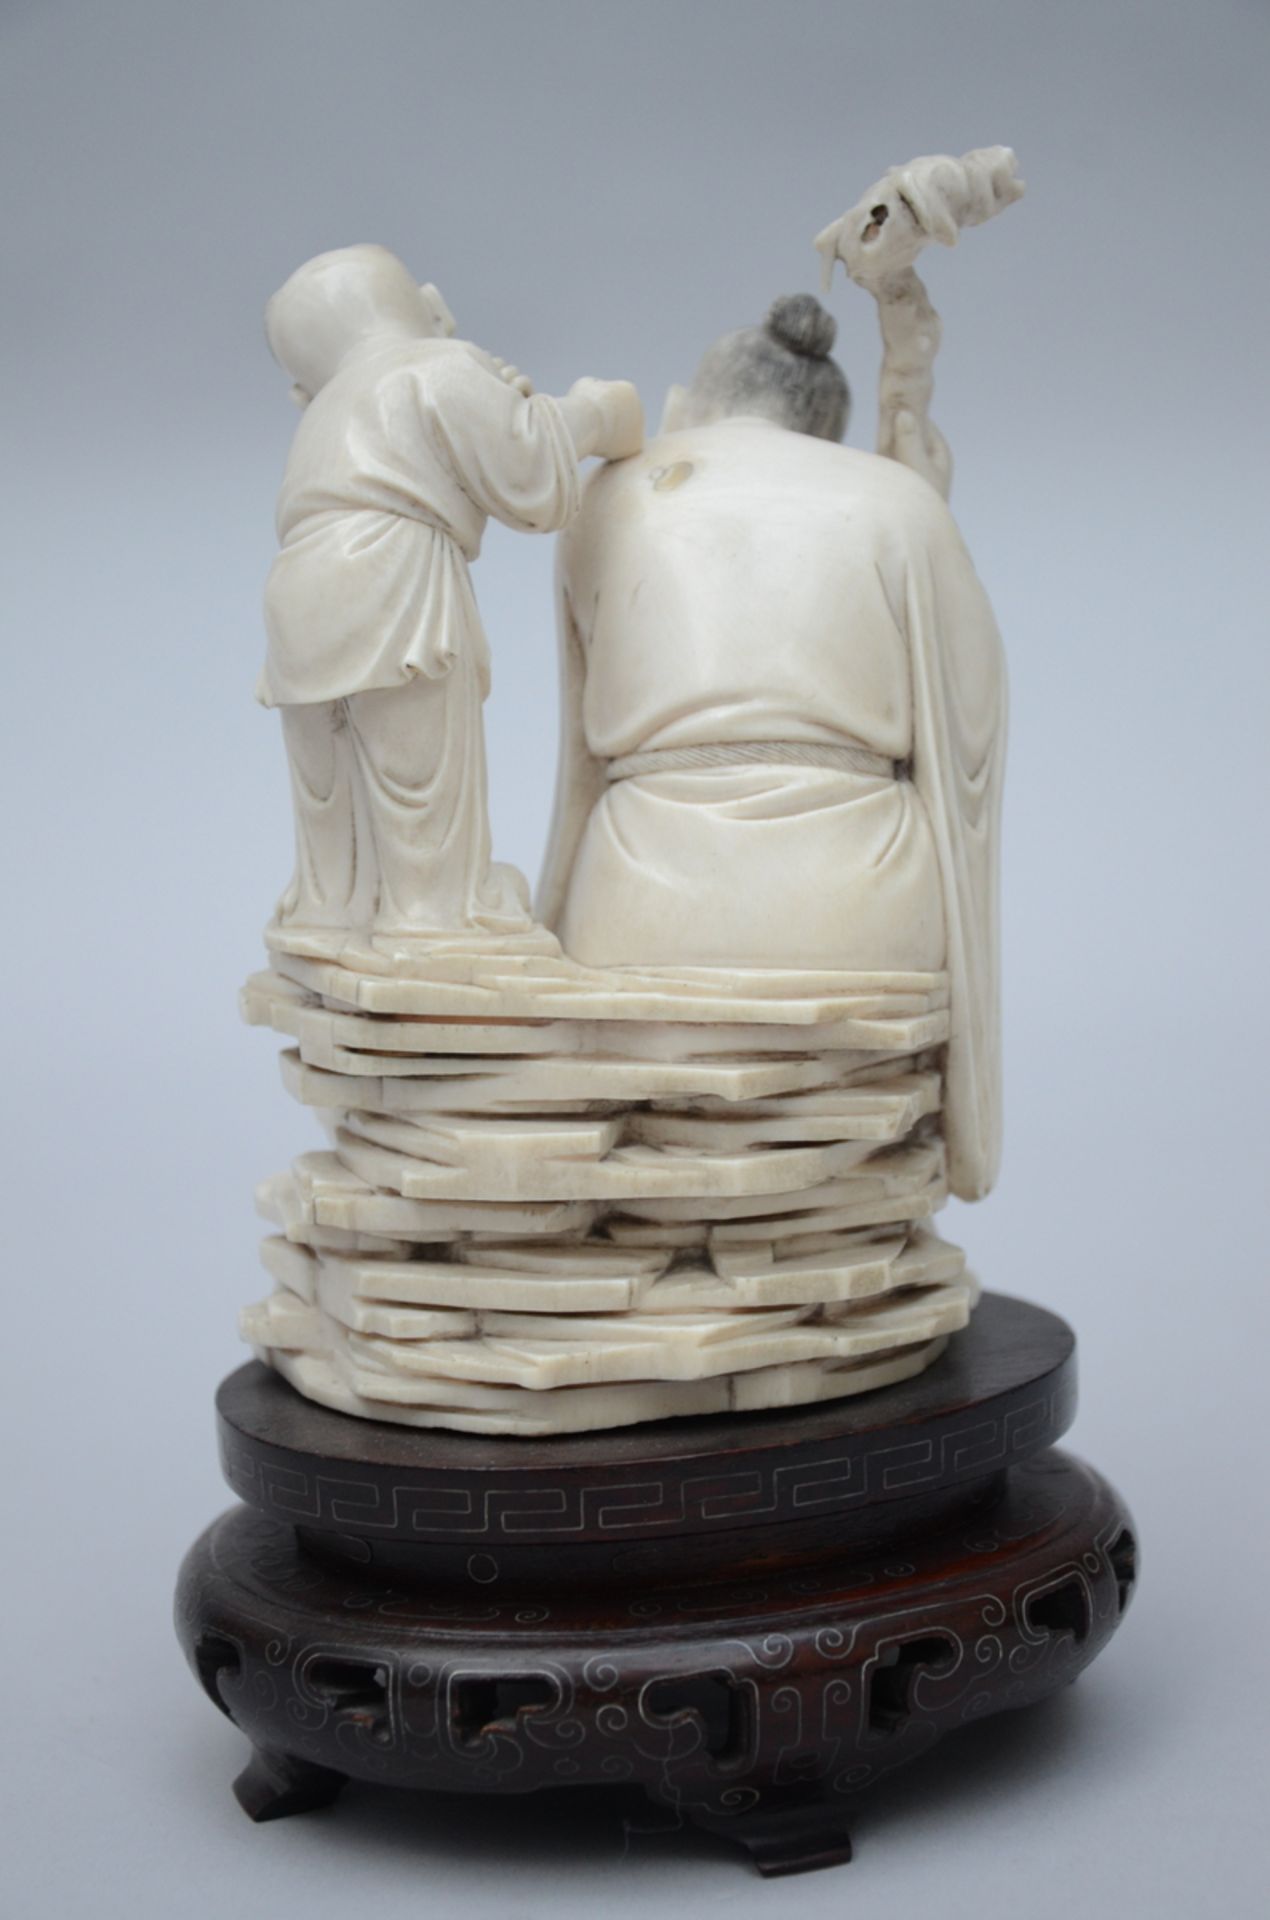 A Chinese ivory statue 'sage with servant', 19th century (14.5 cm) - Image 2 of 2